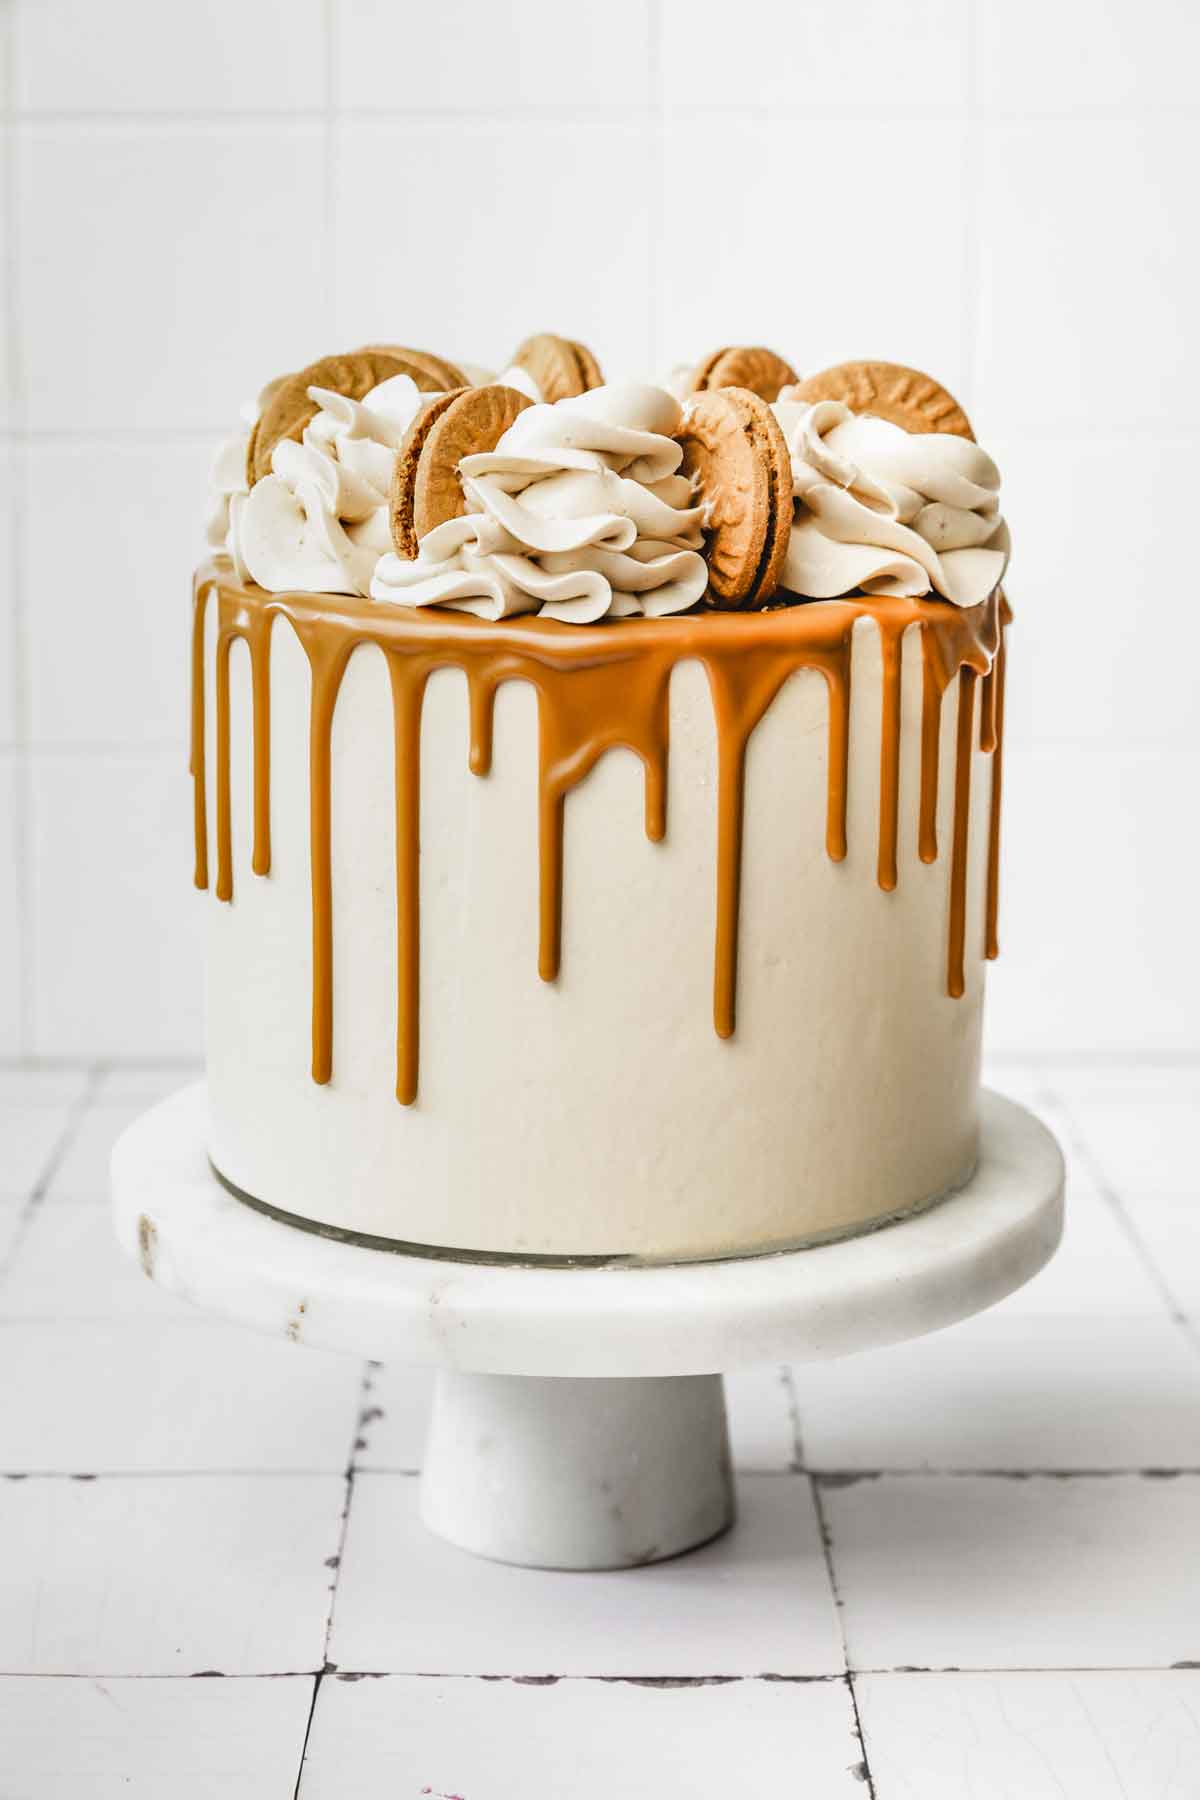 Lotus Biscoff Cake Recipe with Cookie Butter Buttercream, layer cake